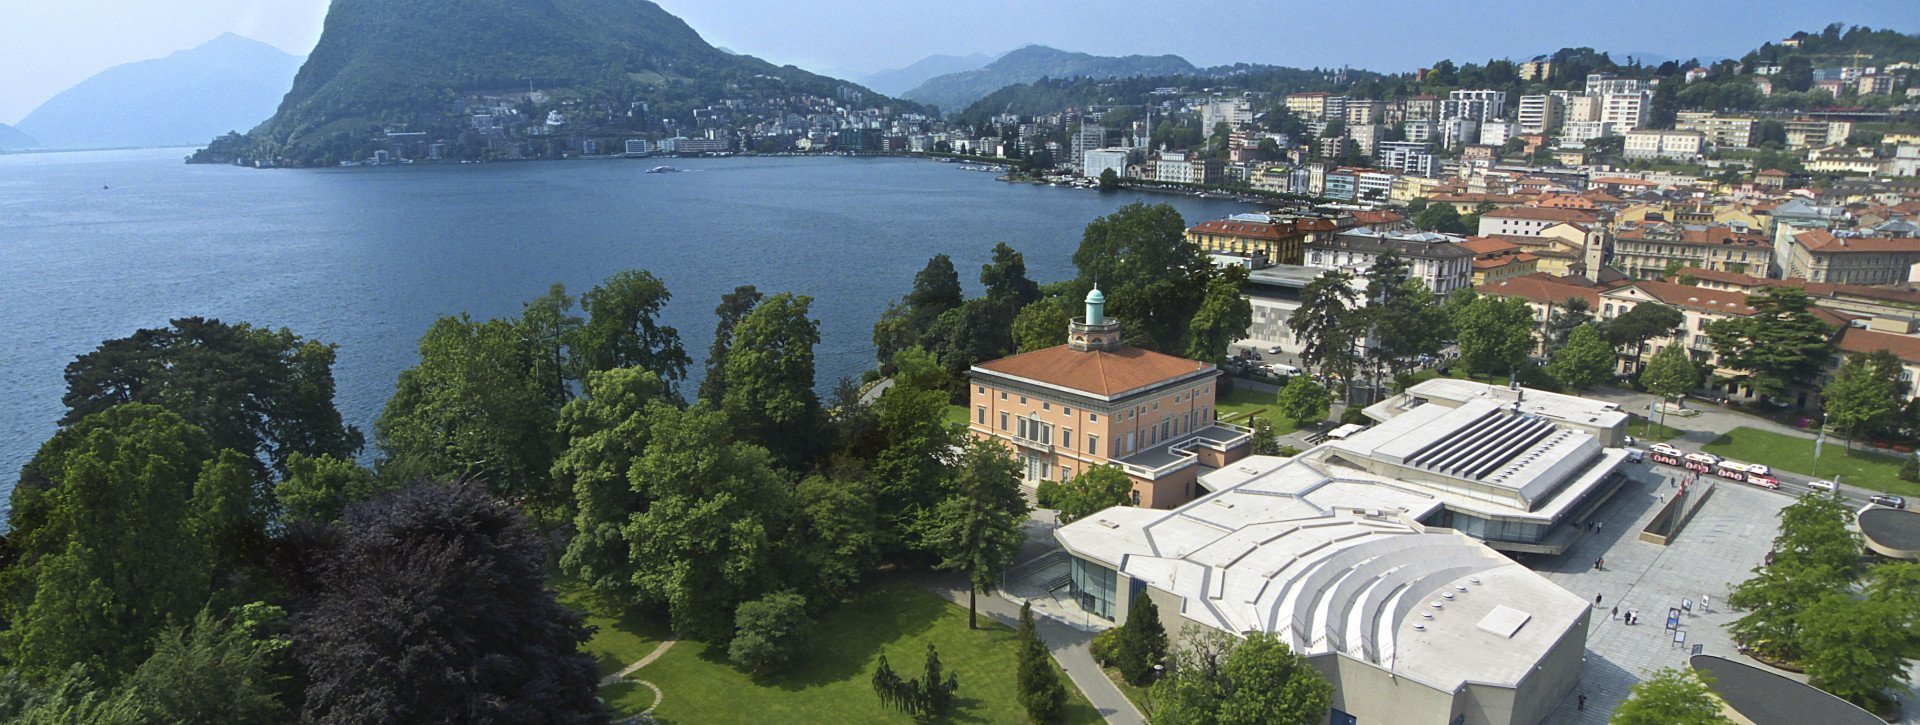 The Convention Centre Lugano is placed at the Lugano Lake